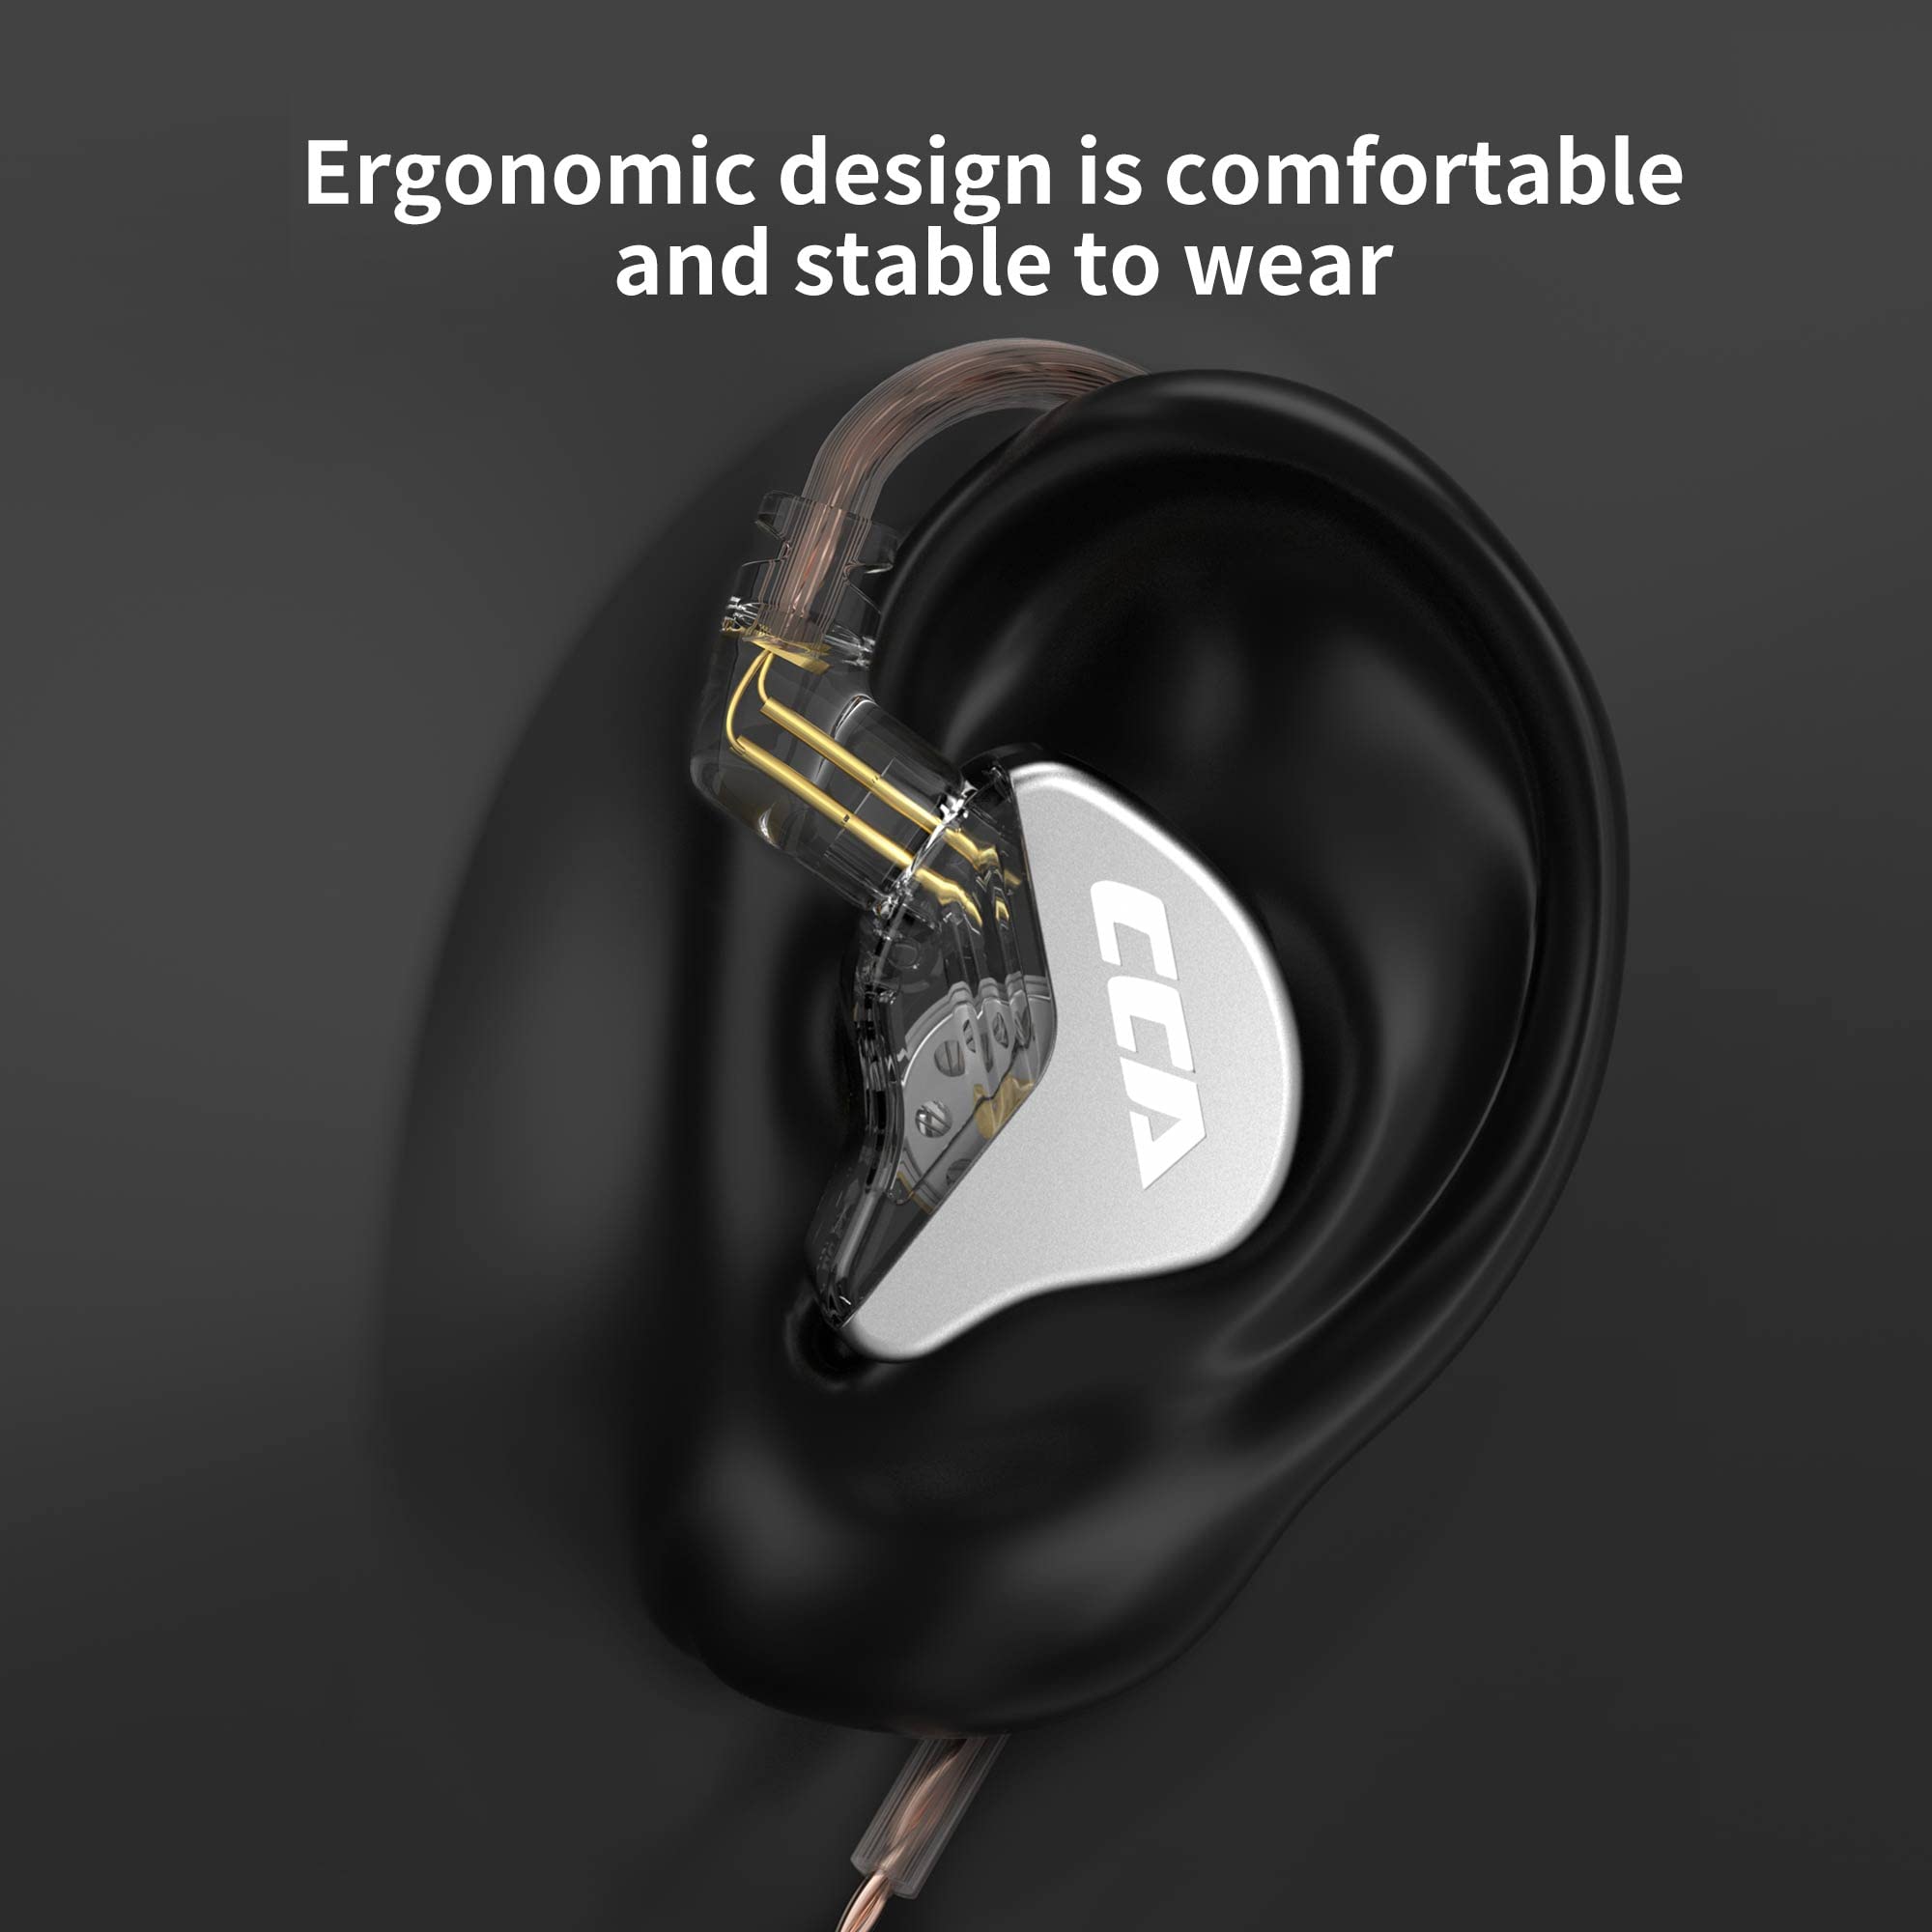 in Ear Monitor CCA CRA Ultra-Thin Diaphragm Dynamic Driver IEM Earphones Bass Earbuds with 2Pin Removable Cord,Compatible with iPhone Android,iPad MP3, Fits All 3.5mm Interface Devices(Silver)